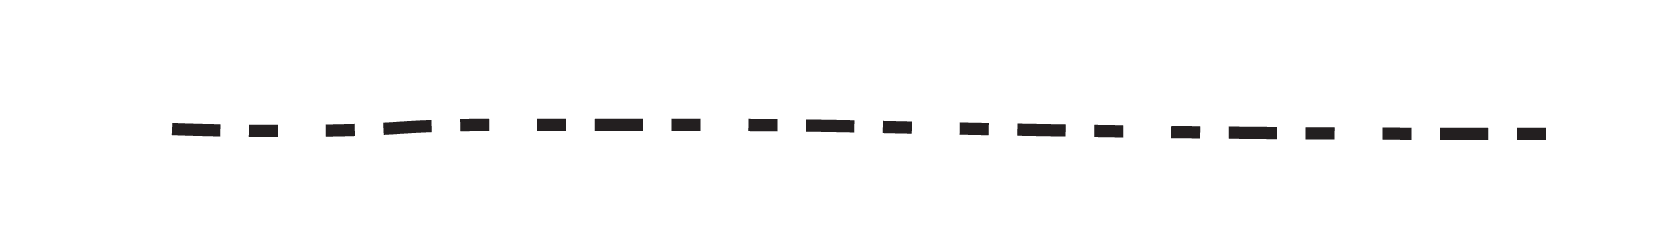 Trace Dotted Line PNG Transparent Image